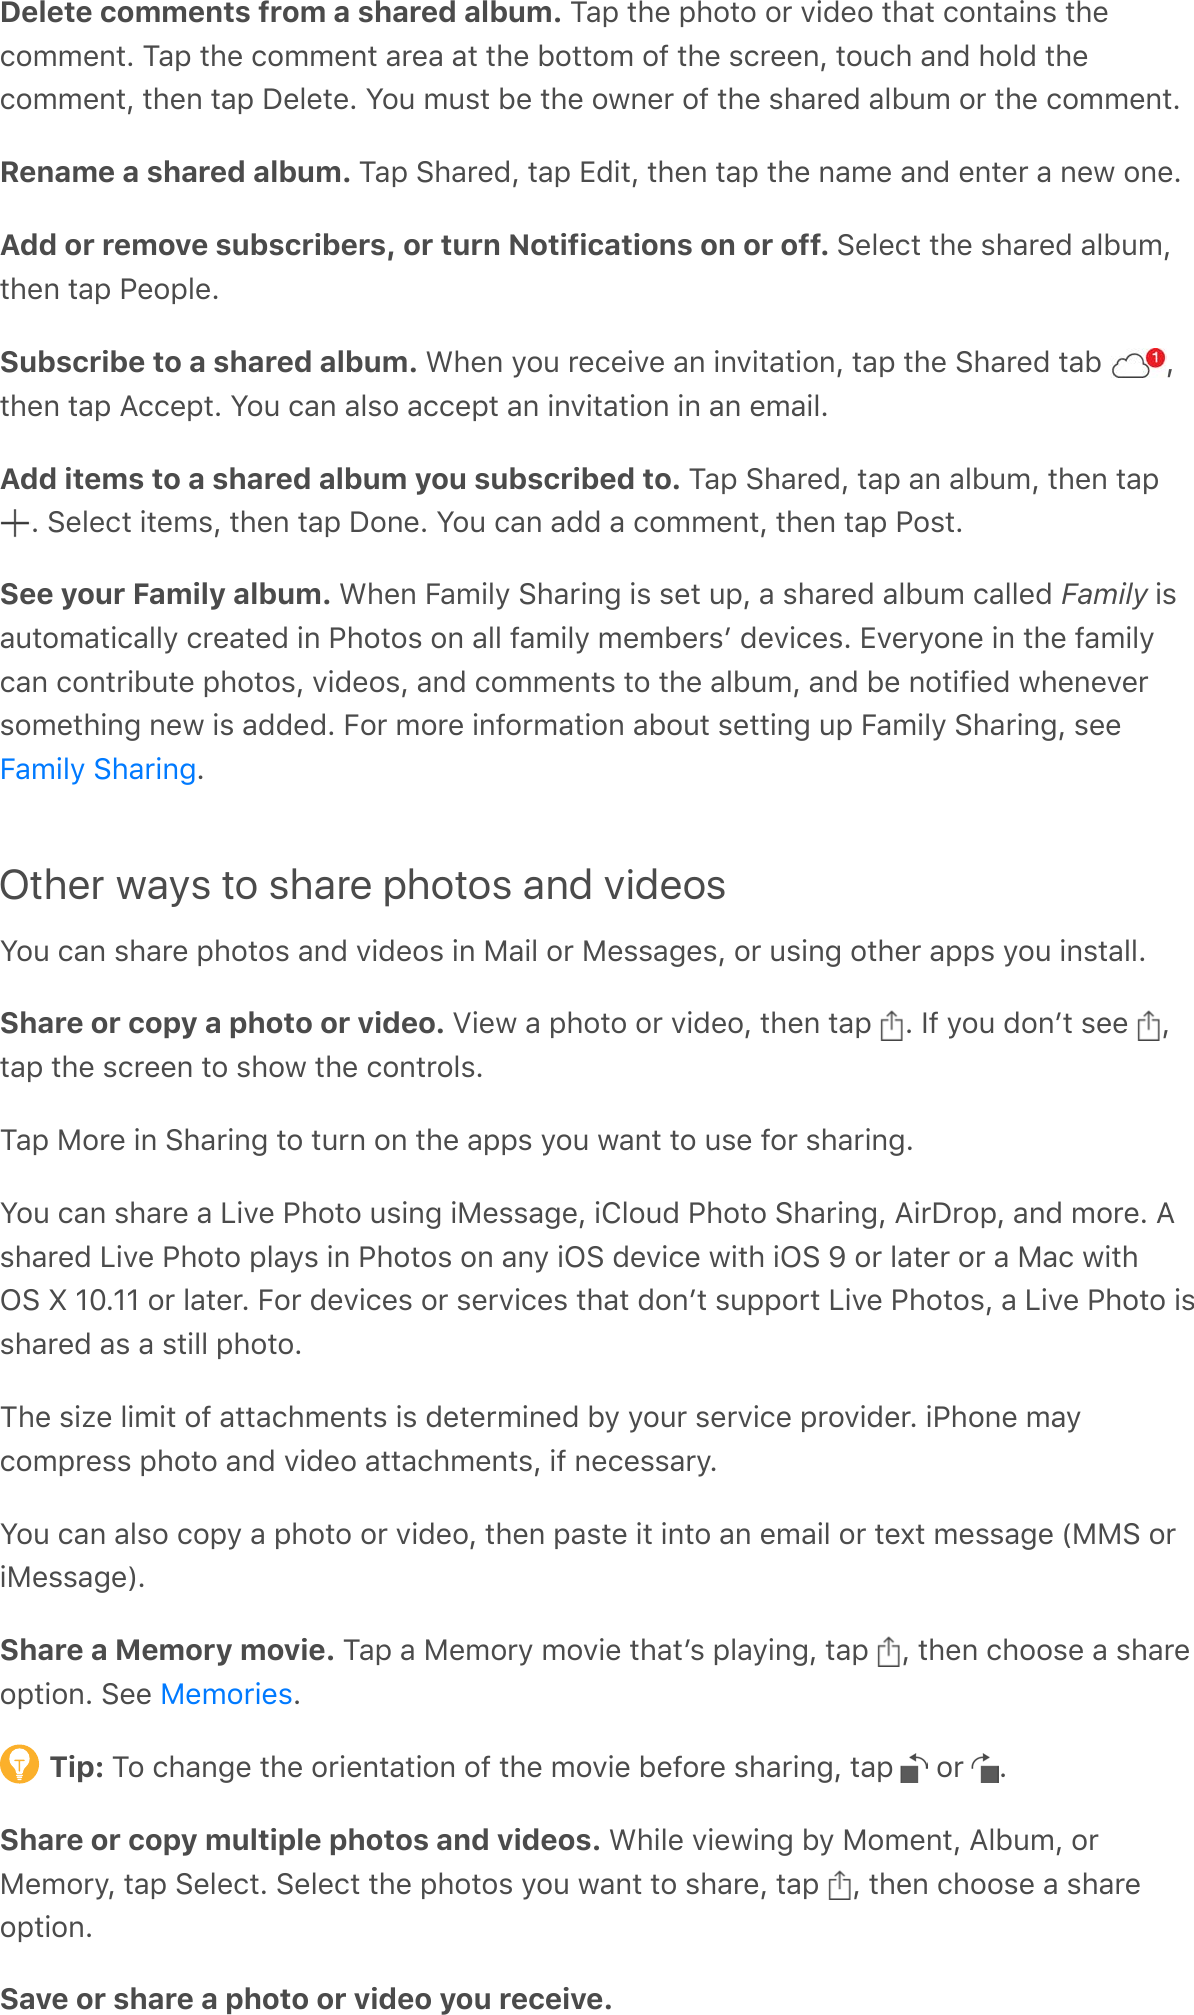 Delete comments from a shared album. 2-6&amp;%1.&amp;61&quot;%&quot;&amp;&quot;,&amp;:(&lt;.&quot;&amp;%1-%&amp;9&quot;#%-(#)&amp;%1.9&quot;&apos;&apos;.#%A&amp;2-6&amp;%1.&amp;9&quot;&apos;&apos;.#%&amp;-,.-&amp;-%&amp;%1.&amp;@&quot;%%&quot;&apos;&amp;&quot;8&amp;%1.&amp;)9,..#L&amp;%&quot;091&amp;-#&lt;&amp;1&quot;?&lt;&amp;%1.9&quot;&apos;&apos;.#%L&amp;%1.#&amp;%-6&amp;!.?.%.A&amp;N&quot;0&amp;&apos;0)%&amp;@.&amp;%1.&amp;&quot;H#.,&amp;&quot;8&amp;%1.&amp;)1-,.&lt;&amp;-?@0&apos;&amp;&quot;,&amp;%1.&amp;9&quot;&apos;&apos;.#%ARename a shared album. 2-6&amp;E1-,.&lt;L&amp;%-6&amp;V&lt;(%L&amp;%1.#&amp;%-6&amp;%1.&amp;#-&apos;.&amp;-#&lt;&amp;.#%.,&amp;-&amp;#.H&amp;&quot;#.AAdd or remove subscribers, or turn Notifications on or off. E.?.9%&amp;%1.&amp;)1-,.&lt;&amp;-?@0&apos;L%1.#&amp;%-6&amp;7.&quot;6?.ASubscribe to a shared album. F1.#&amp;/&quot;0&amp;,.9.(:.&amp;-#&amp;(#:(%-%(&quot;#L&amp;%-6&amp;%1.&amp;E1-,.&lt;&amp;%-@&amp; L%1.#&amp;%-6&amp;;99.6%A&amp;N&quot;0&amp;9-#&amp;-?)&quot;&amp;-99.6%&amp;-#&amp;(#:(%-%(&quot;#&amp;(#&amp;-#&amp;.&apos;-(?AAdd items to a shared album you subscribed to. 2-6&amp;E1-,.&lt;L&amp;%-6&amp;-#&amp;-?@0&apos;L&amp;%1.#&amp;%-6&amp;A&amp;E.?.9%&amp;(%.&apos;)L&amp;%1.#&amp;%-6&amp;!&quot;#.A&amp;N&quot;0&amp;9-#&amp;-&lt;&lt;&amp;-&amp;9&quot;&apos;&apos;.#%L&amp;%1.#&amp;%-6&amp;7&quot;)%ASee your Family album. F1.#&amp;+-&apos;(?/&amp;E1-,(#5&amp;()&amp;).%&amp;06L&amp;-&amp;)1-,.&lt;&amp;-?@0&apos;&amp;9-??.&lt;&amp;Family&amp;()-0%&quot;&apos;-%(9-??/&amp;9,.-%.&lt;&amp;(#&amp;71&quot;%&quot;)&amp;&quot;#&amp;-??&amp;8-&apos;(?/&amp;&apos;.&apos;@.,)$&amp;&lt;.:(9.)A&amp;V:.,/&quot;#.&amp;(#&amp;%1.&amp;8-&apos;(?/9-#&amp;9&quot;#%,(@0%.&amp;61&quot;%&quot;)L&amp;:(&lt;.&quot;)L&amp;-#&lt;&amp;9&quot;&apos;&apos;.#%)&amp;%&quot;&amp;%1.&amp;-?@0&apos;L&amp;-#&lt;&amp;@.&amp;#&quot;%(8(.&lt;&amp;H1.#.:.,)&quot;&apos;.%1(#5&amp;#.H&amp;()&amp;-&lt;&lt;.&lt;A&amp;+&quot;,&amp;&apos;&quot;,.&amp;(#8&quot;,&apos;-%(&quot;#&amp;-@&quot;0%&amp;).%%(#5&amp;06&amp;+-&apos;(?/&amp;E1-,(#5L&amp;)..AOther ways to share photos and videosN&quot;0&amp;9-#&amp;)1-,.&amp;61&quot;%&quot;)&amp;-#&lt;&amp;:(&lt;.&quot;)&amp;(#&amp;B-(?&amp;&quot;,&amp;B.))-5.)L&amp;&quot;,&amp;0)(#5&amp;&quot;%1.,&amp;-66)&amp;/&quot;0&amp;(#)%-??AShare or copy a photo or video. S(.H&amp;-&amp;61&quot;%&quot;&amp;&quot;,&amp;:(&lt;.&quot;L&amp;%1.#&amp;%-6&amp; A&amp;Q8&amp;/&quot;0&amp;&lt;&quot;#$%&amp;)..&amp; L%-6&amp;%1.&amp;)9,..#&amp;%&quot;&amp;)1&quot;H&amp;%1.&amp;9&quot;#%,&quot;?)A2-6&amp;B&quot;,.&amp;(#&amp;E1-,(#5&amp;%&quot;&amp;%0,#&amp;&quot;#&amp;%1.&amp;-66)&amp;/&quot;0&amp;H-#%&amp;%&quot;&amp;0).&amp;8&quot;,&amp;)1-,(#5AN&quot;0&amp;9-#&amp;)1-,.&amp;-&amp;=(:.&amp;71&quot;%&quot;&amp;0)(#5&amp;(B.))-5.L&amp;(O?&quot;0&lt;&amp;71&quot;%&quot;&amp;E1-,(#5L&amp;;(,!,&quot;6L&amp;-#&lt;&amp;&apos;&quot;,.A&amp;;)1-,.&lt;&amp;=(:.&amp;71&quot;%&quot;&amp;6?-/)&amp;(#&amp;71&quot;%&quot;)&amp;&quot;#&amp;-#/&amp;(IE&amp;&lt;.:(9.&amp;H(%1&amp;(IE&amp;q&amp;&quot;,&amp;?-%.,&amp;&quot;,&amp;-&amp;B-9&amp;H(%1IE&amp;n&amp;JoAJJ&amp;&quot;,&amp;?-%.,A&amp;+&quot;,&amp;&lt;.:(9.)&amp;&quot;,&amp;).,:(9.)&amp;%1-%&amp;&lt;&quot;#$%&amp;)066&quot;,%&amp;=(:.&amp;71&quot;%&quot;)L&amp;-&amp;=(:.&amp;71&quot;%&quot;&amp;())1-,.&lt;&amp;-)&amp;-&amp;)%(??&amp;61&quot;%&quot;A21.&amp;)(4.&amp;?(&apos;(%&amp;&quot;8&amp;-%%-91&apos;.#%)&amp;()&amp;&lt;.%.,&apos;(#.&lt;&amp;@/&amp;/&quot;0,&amp;).,:(9.&amp;6,&quot;:(&lt;.,A&amp;(71&quot;#.&amp;&apos;-/9&quot;&apos;6,.))&amp;61&quot;%&quot;&amp;-#&lt;&amp;:(&lt;.&quot;&amp;-%%-91&apos;.#%)L&amp;(8&amp;#.9.))-,/AN&quot;0&amp;9-#&amp;-?)&quot;&amp;9&quot;6/&amp;-&amp;61&quot;%&quot;&amp;&quot;,&amp;:(&lt;.&quot;L&amp;%1.#&amp;6-)%.&amp;(%&amp;(#%&quot;&amp;-#&amp;.&apos;-(?&amp;&quot;,&amp;%.`%&amp;&apos;.))-5.&amp;^BBE&amp;&quot;,(B.))-5._AShare a Memory movie. 2-6&amp;-&amp;B.&apos;&quot;,/&amp;&apos;&quot;:(.&amp;%1-%$)&amp;6?-/(#5L&amp;%-6&amp; L&amp;%1.#&amp;91&quot;&quot;).&amp;-&amp;)1-,.&quot;6%(&quot;#A&amp;E..&amp; ATip: 2&quot;&amp;91-#5.&amp;%1.&amp;&quot;,(.#%-%(&quot;#&amp;&quot;8&amp;%1.&amp;&apos;&quot;:(.&amp;@.8&quot;,.&amp;)1-,(#5L&amp;%-6&amp; &amp;&quot;,&amp; AShare or copy multiple photos and videos. F1(?.&amp;:(.H(#5&amp;@/&amp;B&quot;&apos;.#%L&amp;;?@0&apos;L&amp;&quot;,B.&apos;&quot;,/L&amp;%-6&amp;E.?.9%A&amp;E.?.9%&amp;%1.&amp;61&quot;%&quot;)&amp;/&quot;0&amp;H-#%&amp;%&quot;&amp;)1-,.L&amp;%-6&amp; L&amp;%1.#&amp;91&quot;&quot;).&amp;-&amp;)1-,.&quot;6%(&quot;#ASave or share a photo or video you receive.+-&apos;(?/&amp;E1-,(#5B.&apos;&quot;,(.)